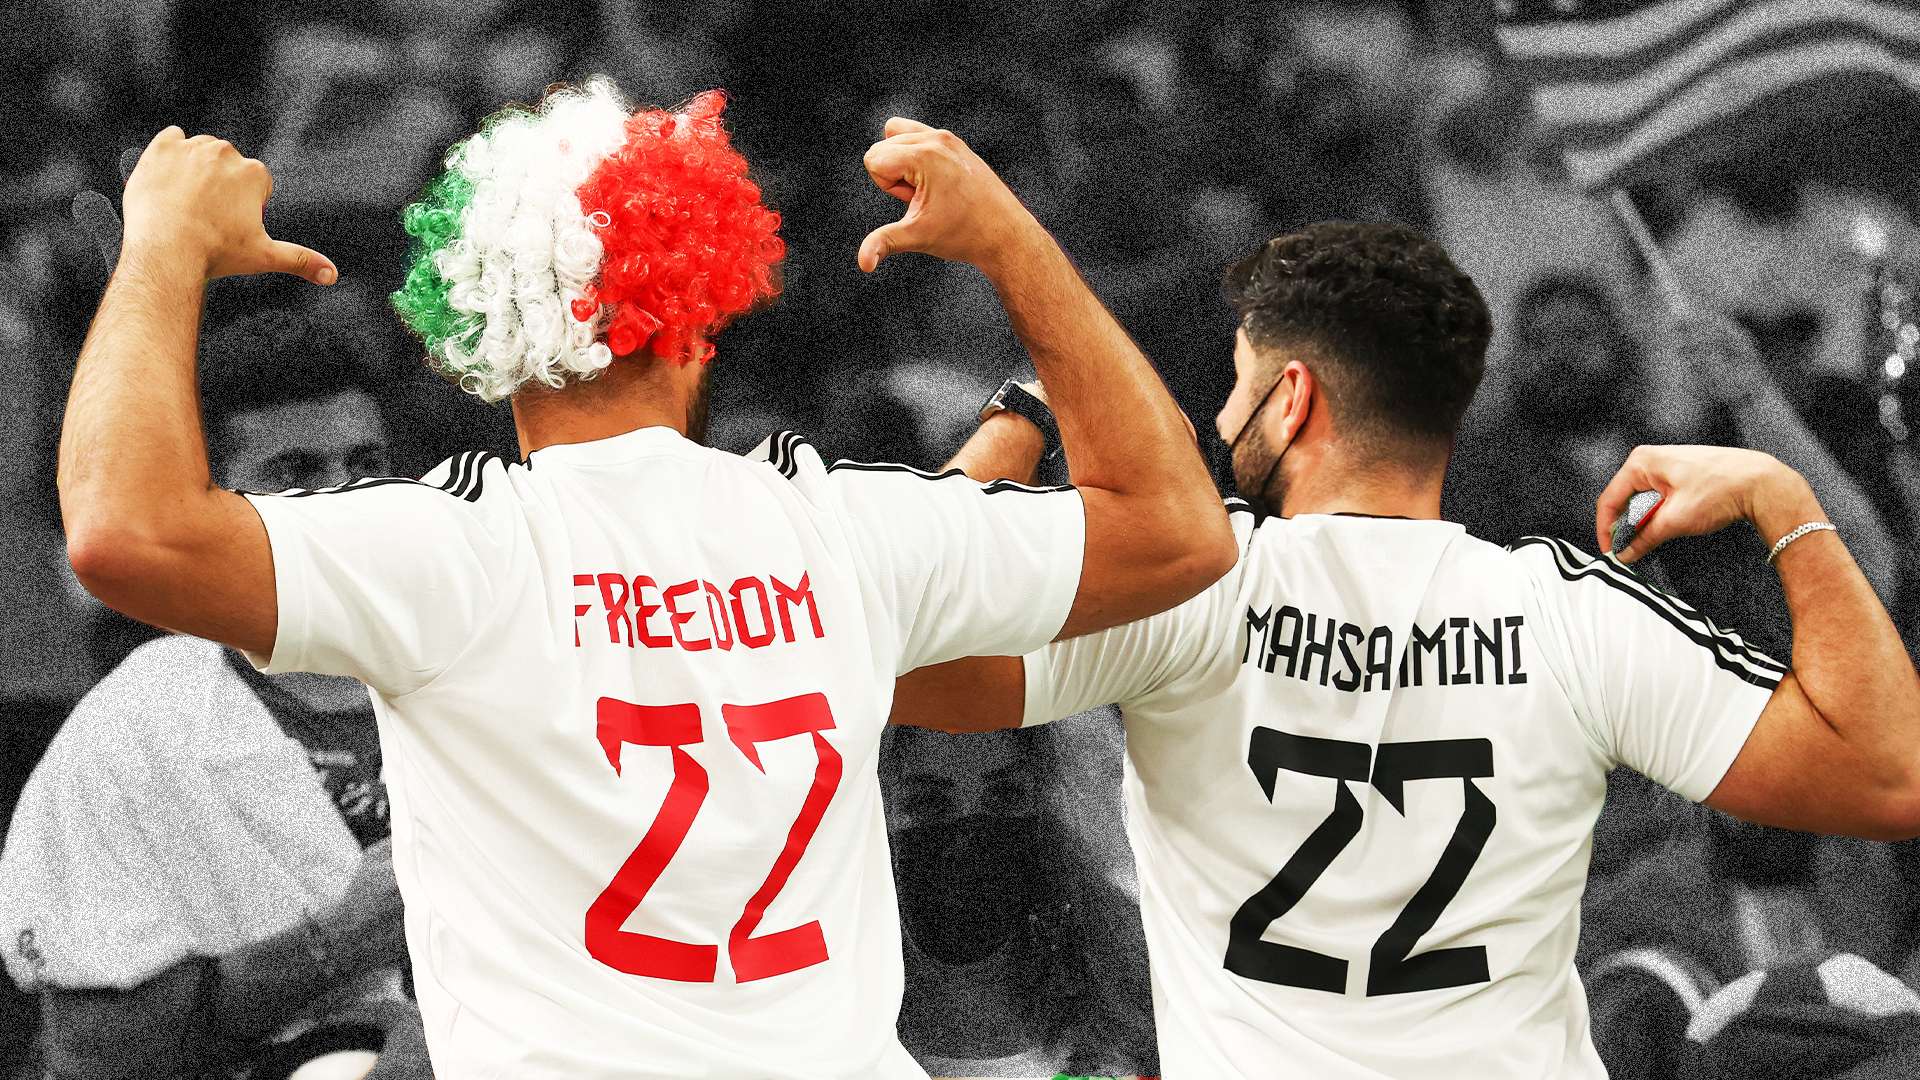 Iran attempted to use the World Cup to stoke nationalist pride